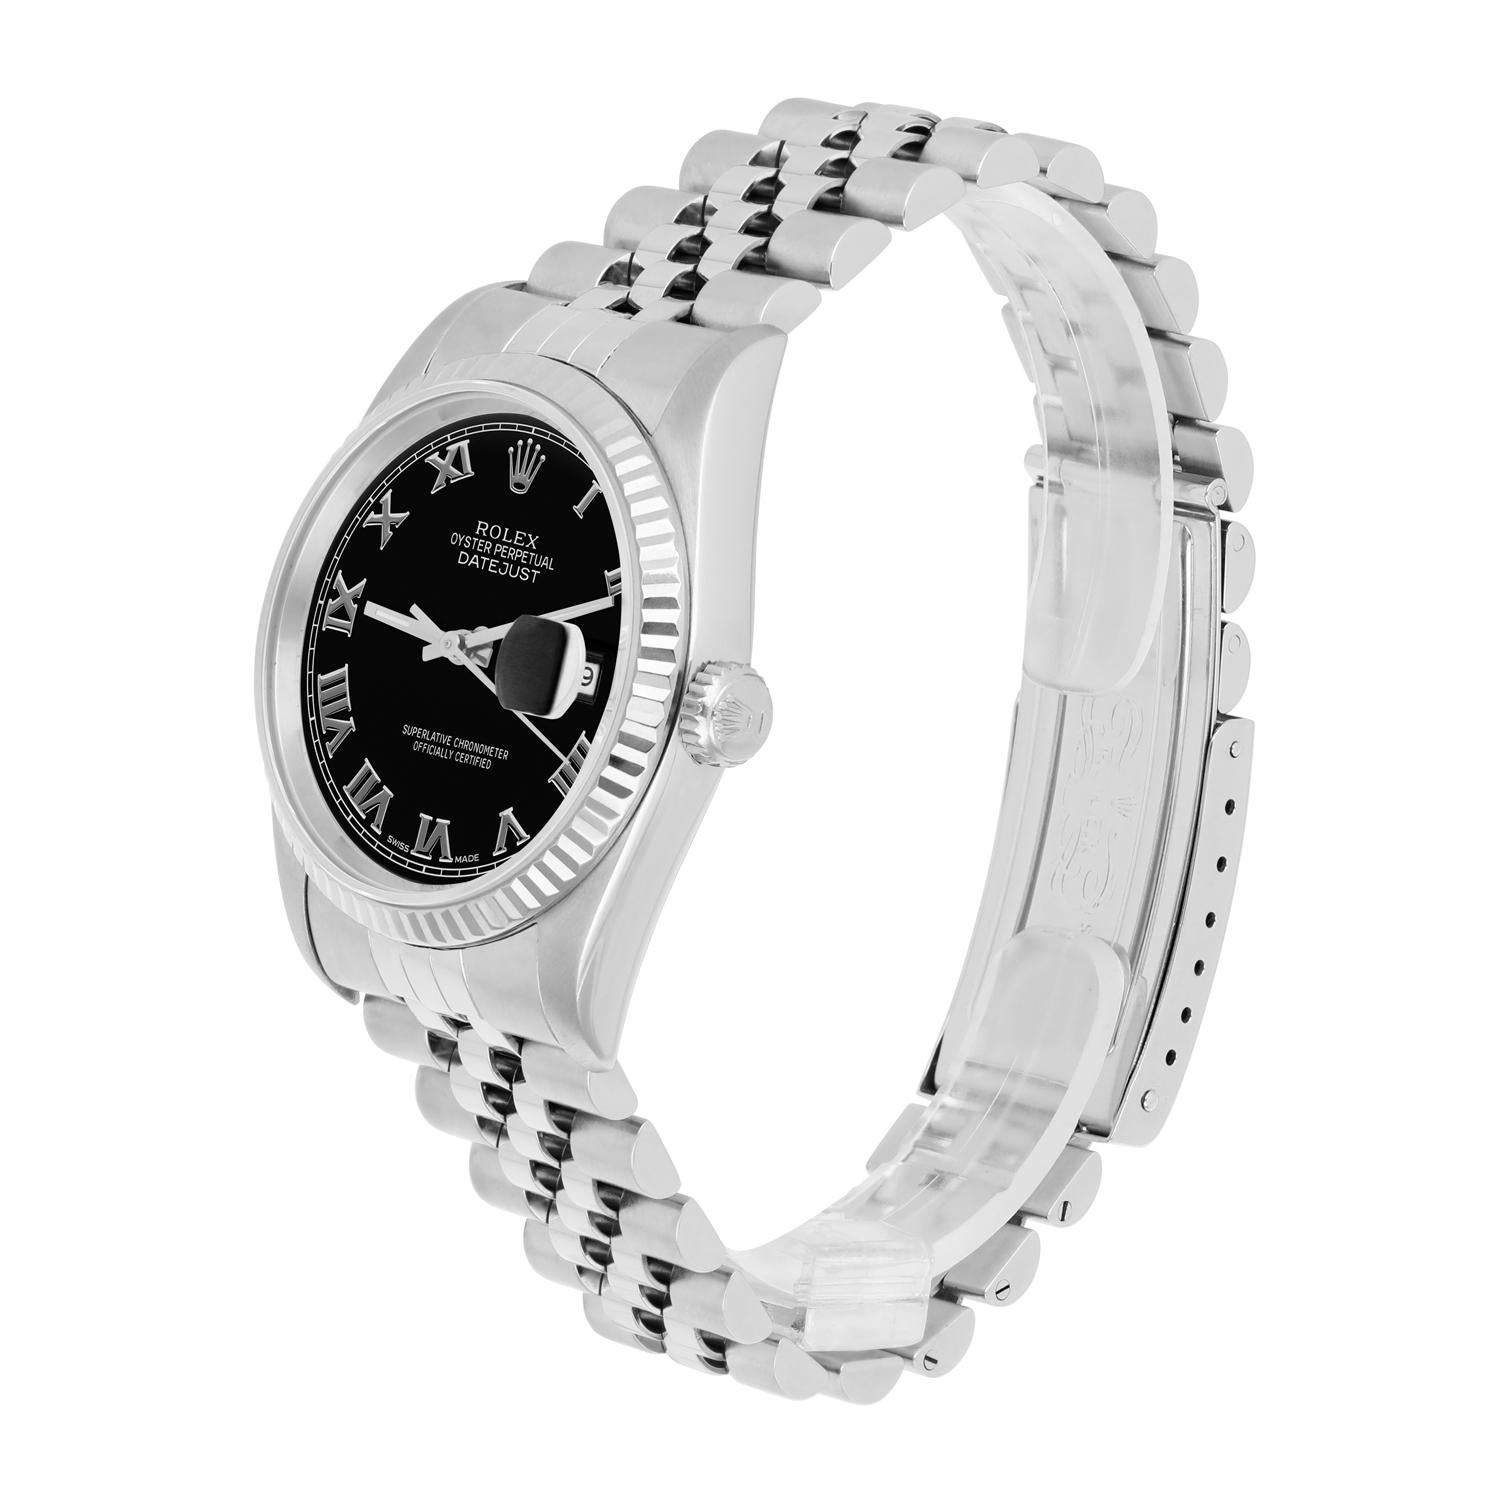 Women's or Men's Rolex Datejust 36mm Stainless Steel 16234 Black Roman Dial, Jubilee Circa 1995 For Sale